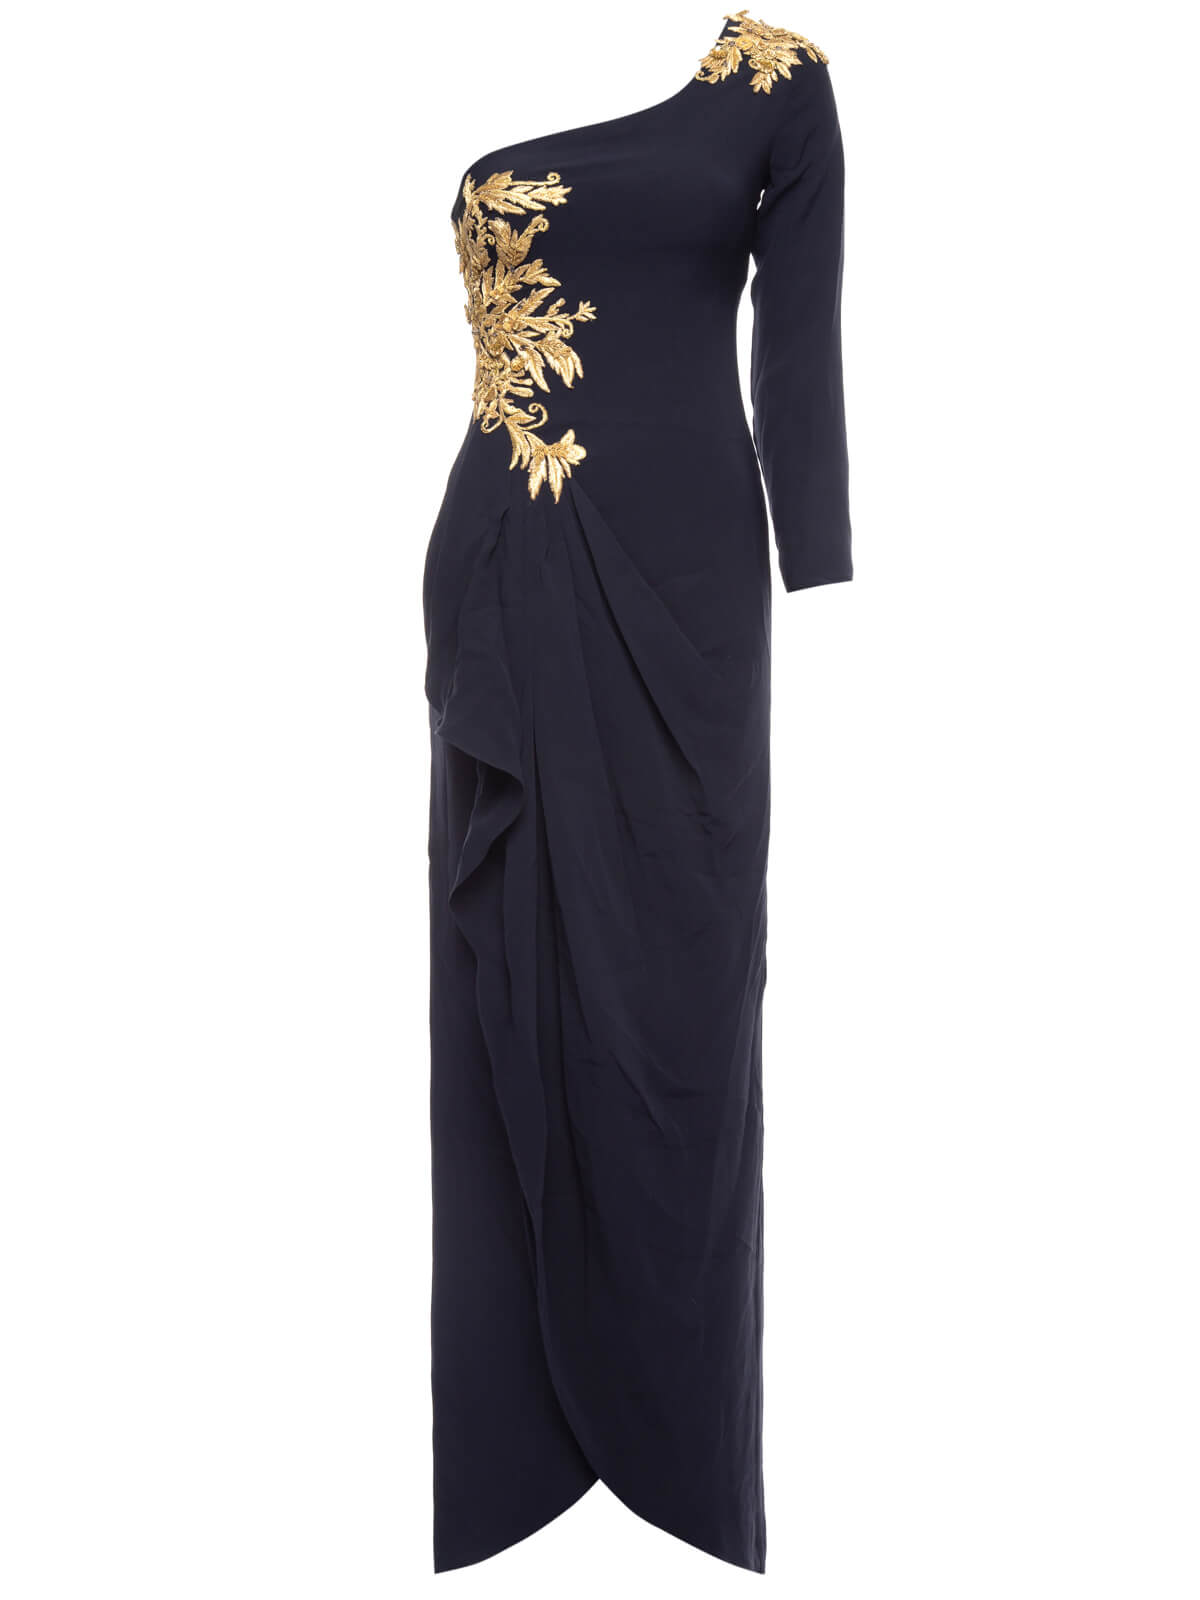 Marchesa Notte Navy One Shoulder Embroidered Gown 38 IT, 34 FR, UK 6, US 2